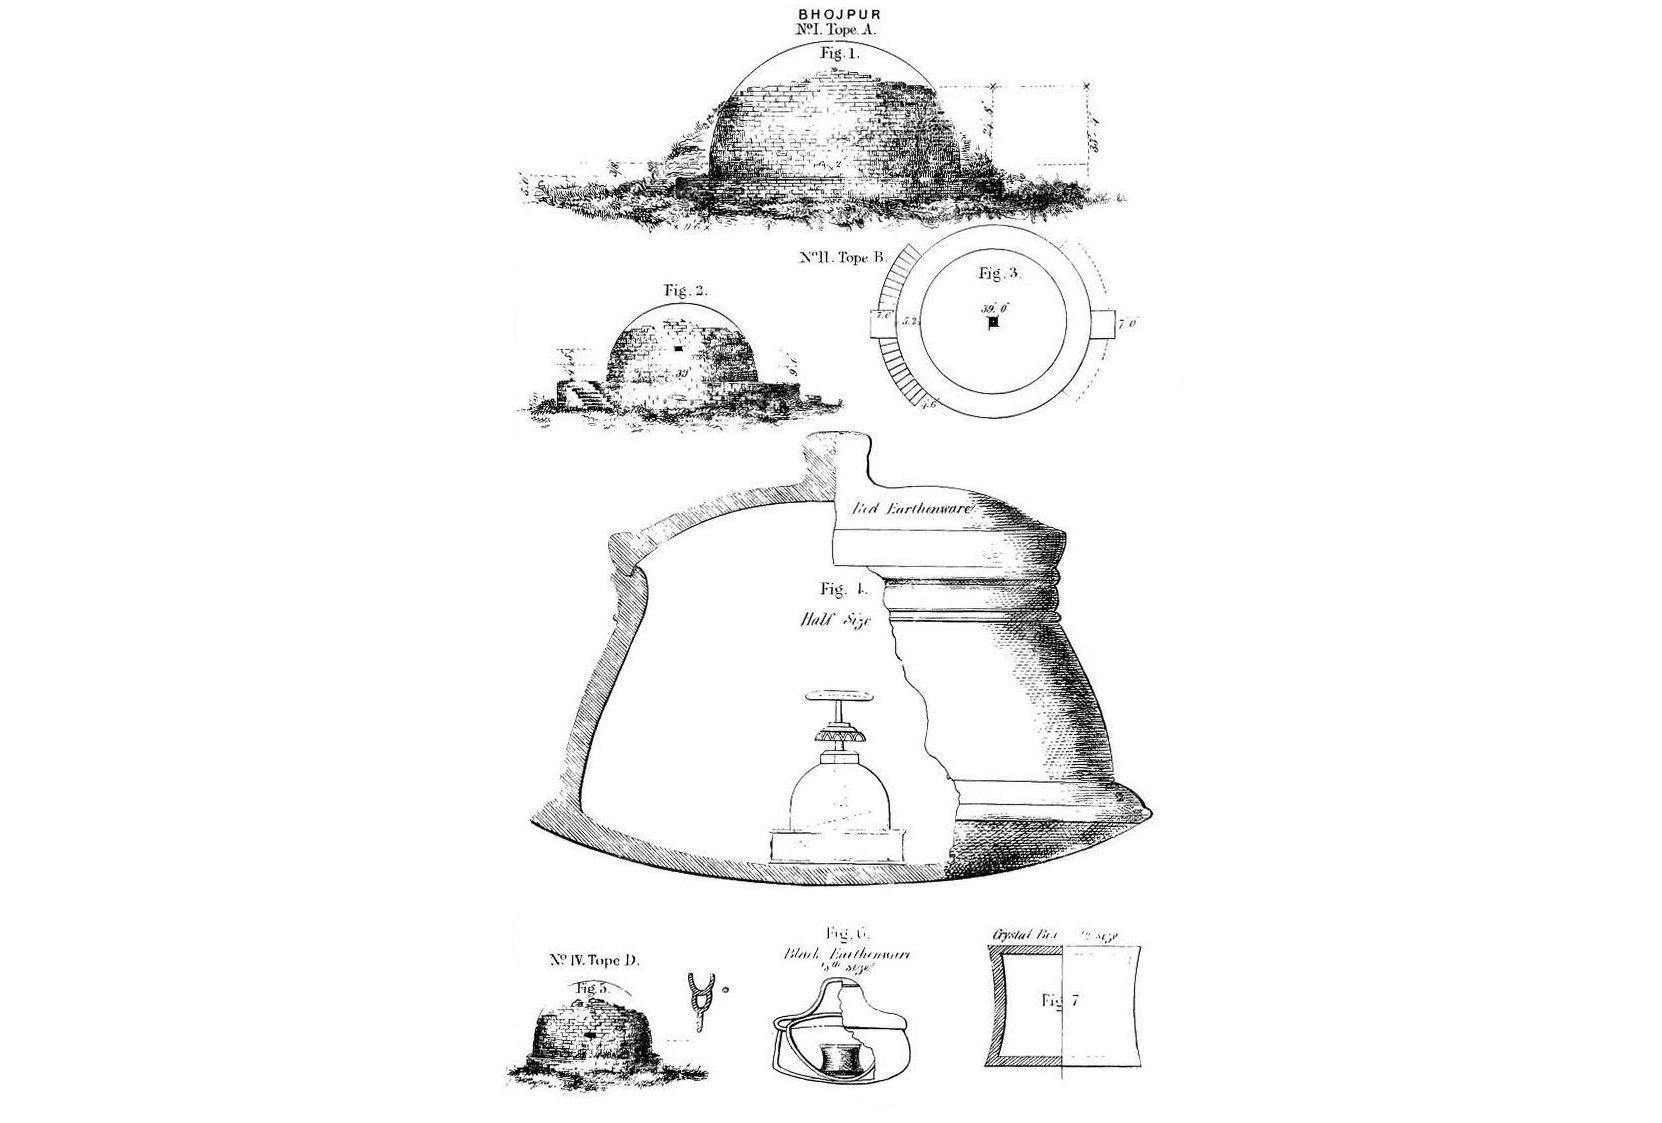 Bhojpur Stupa and reliquaries